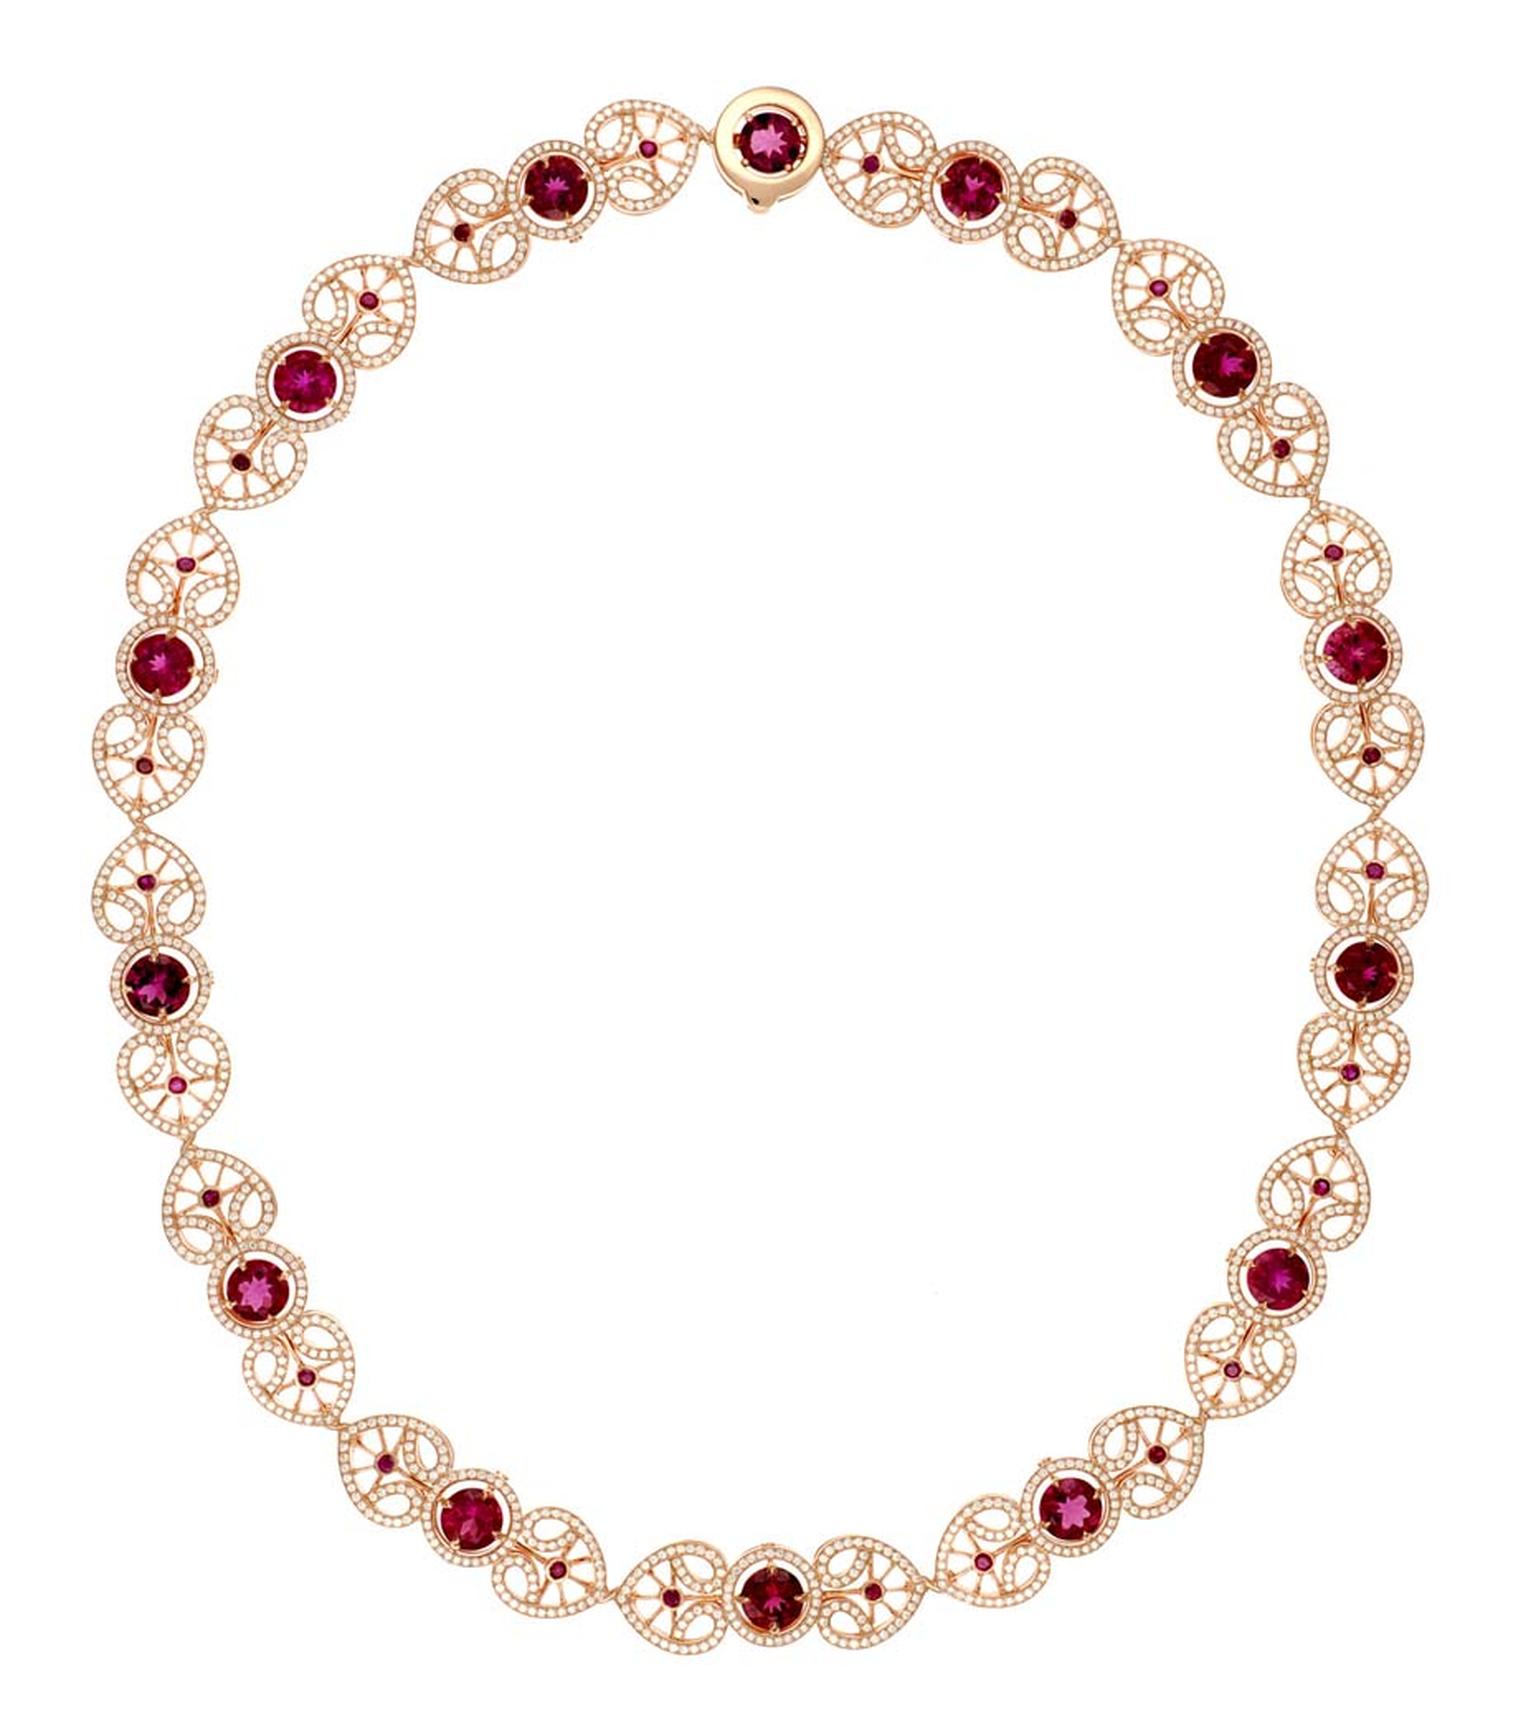 Chopard Red Carpet Collection necklace featuring rubellites, rubies and diamonds set in rose gold (£POA).